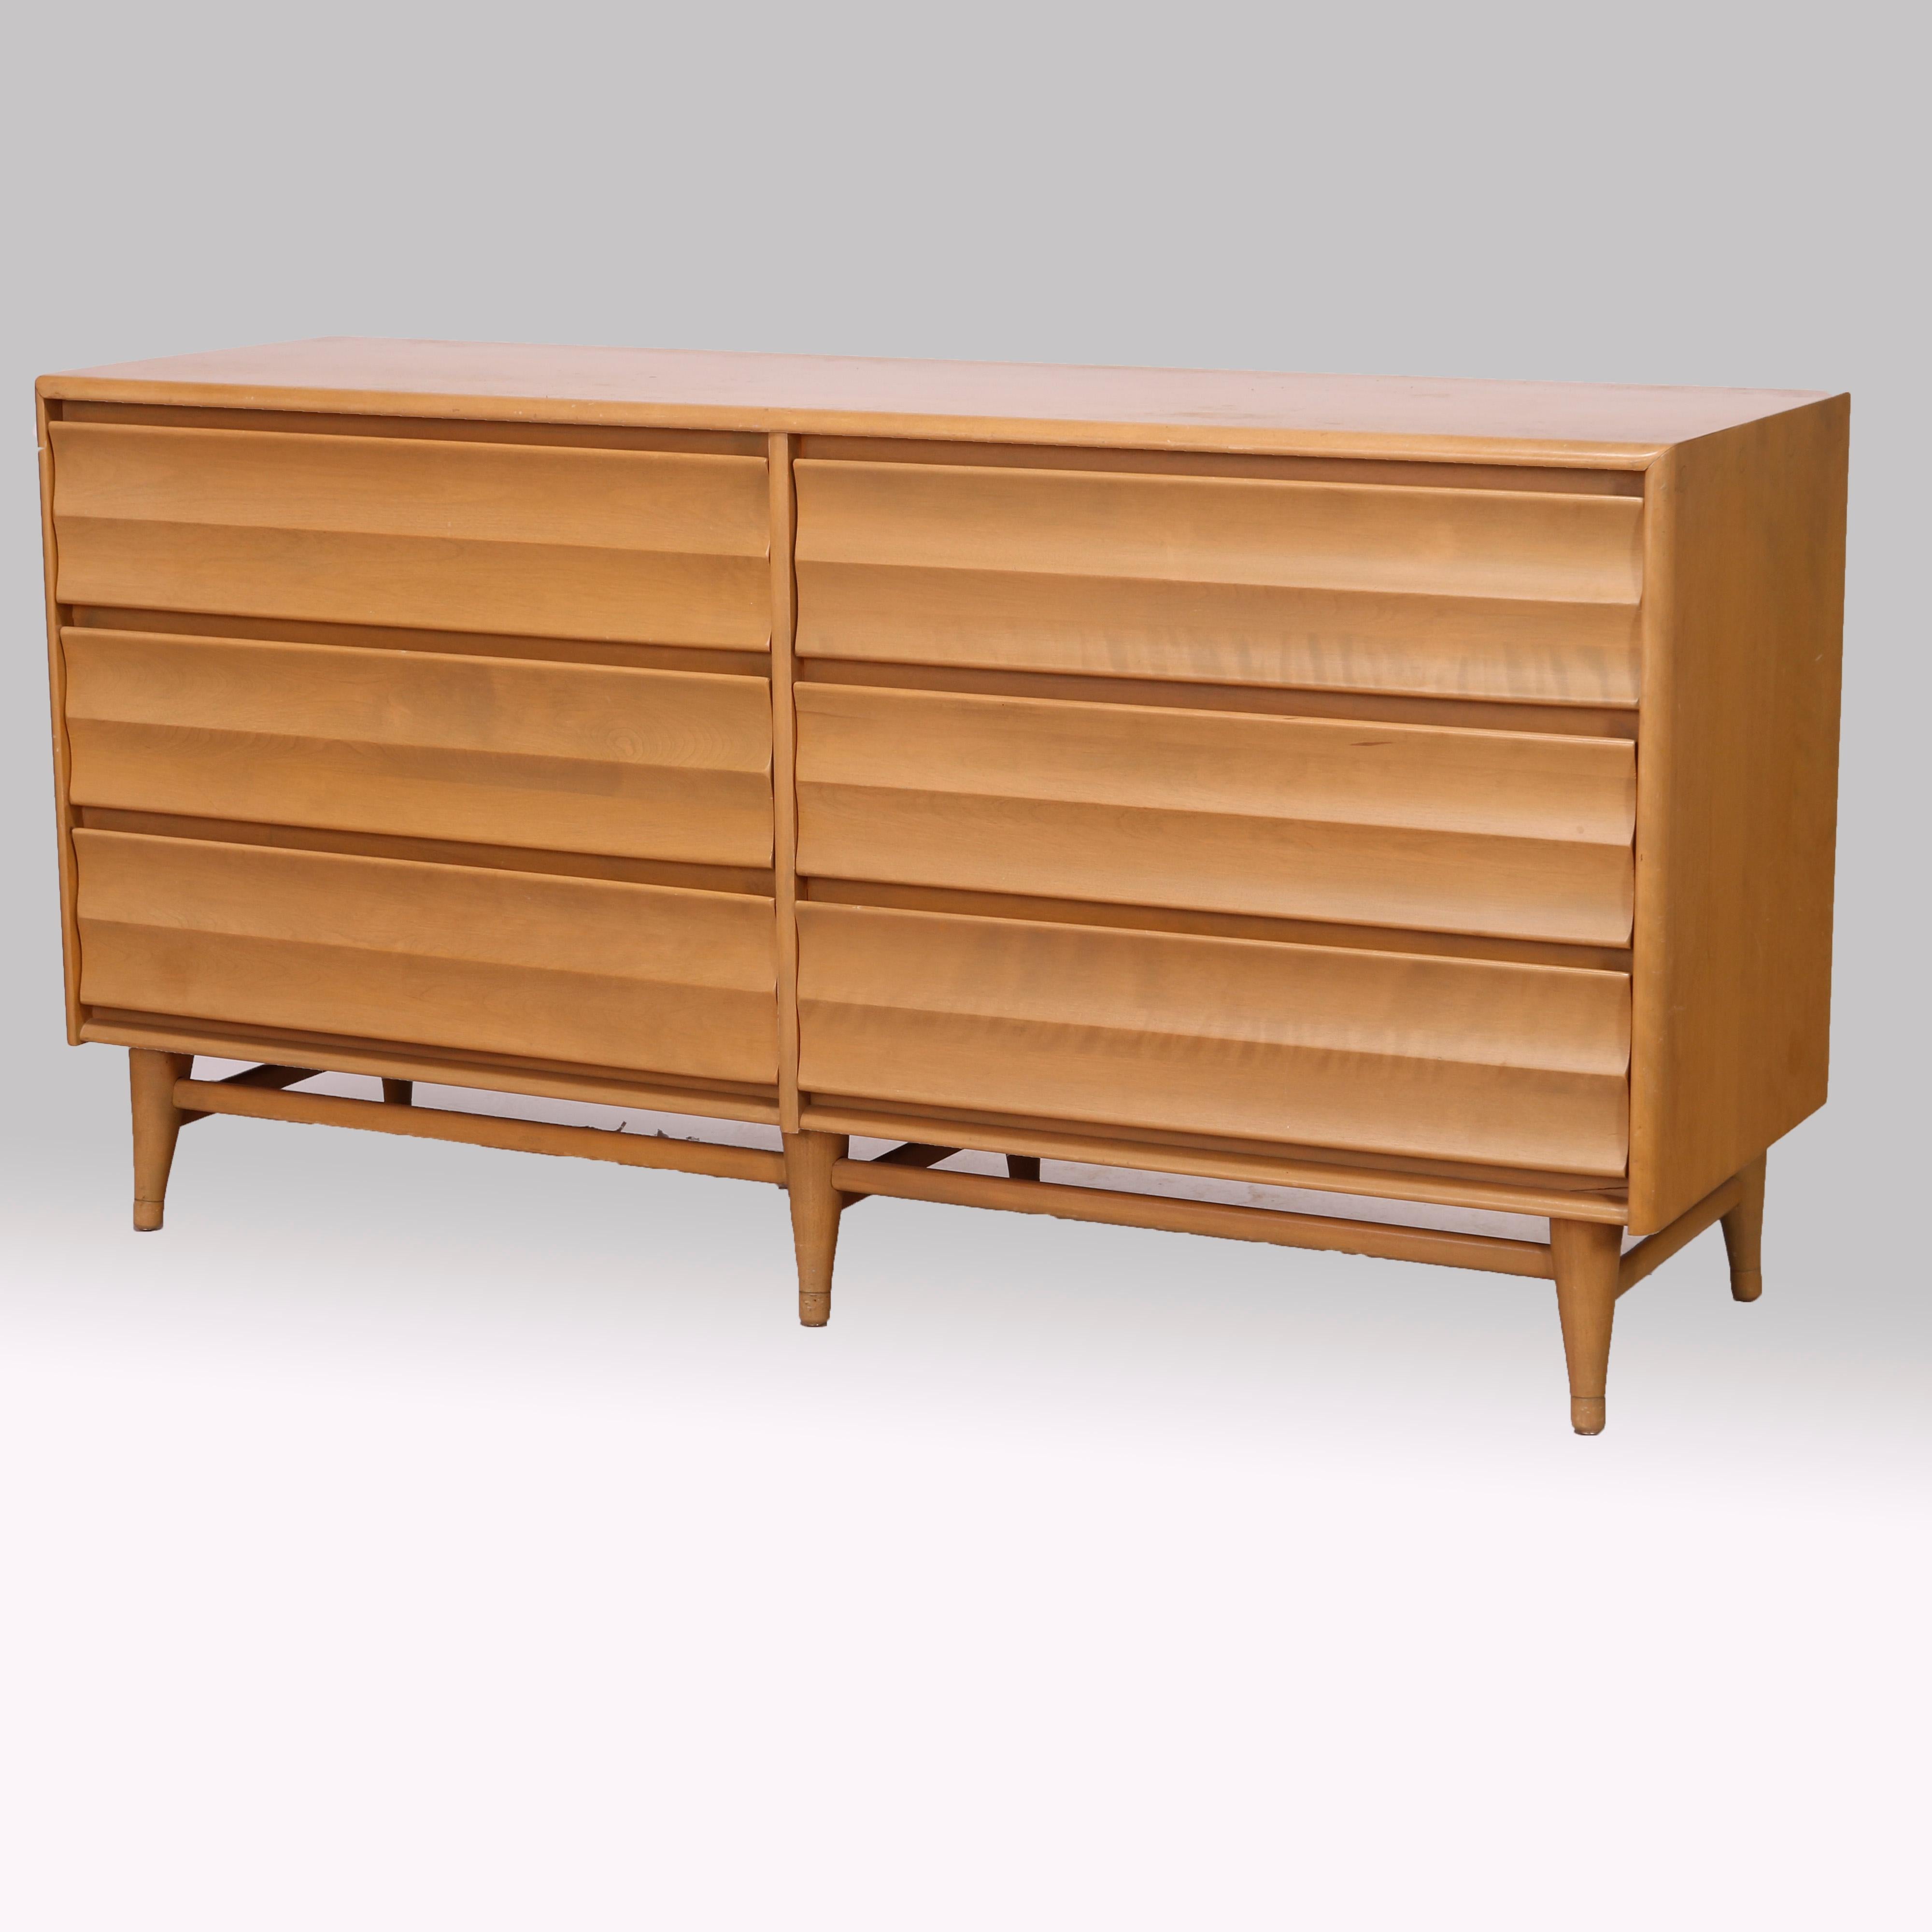 A Mid Century Modern double low chest from the Harmonic line by Heywood Wakefield offers birch construction with six drawers raised on conical legs and with Platinum finish, maker mark as photographed, mid-20th century

Measures - 31.25''H x 60''W